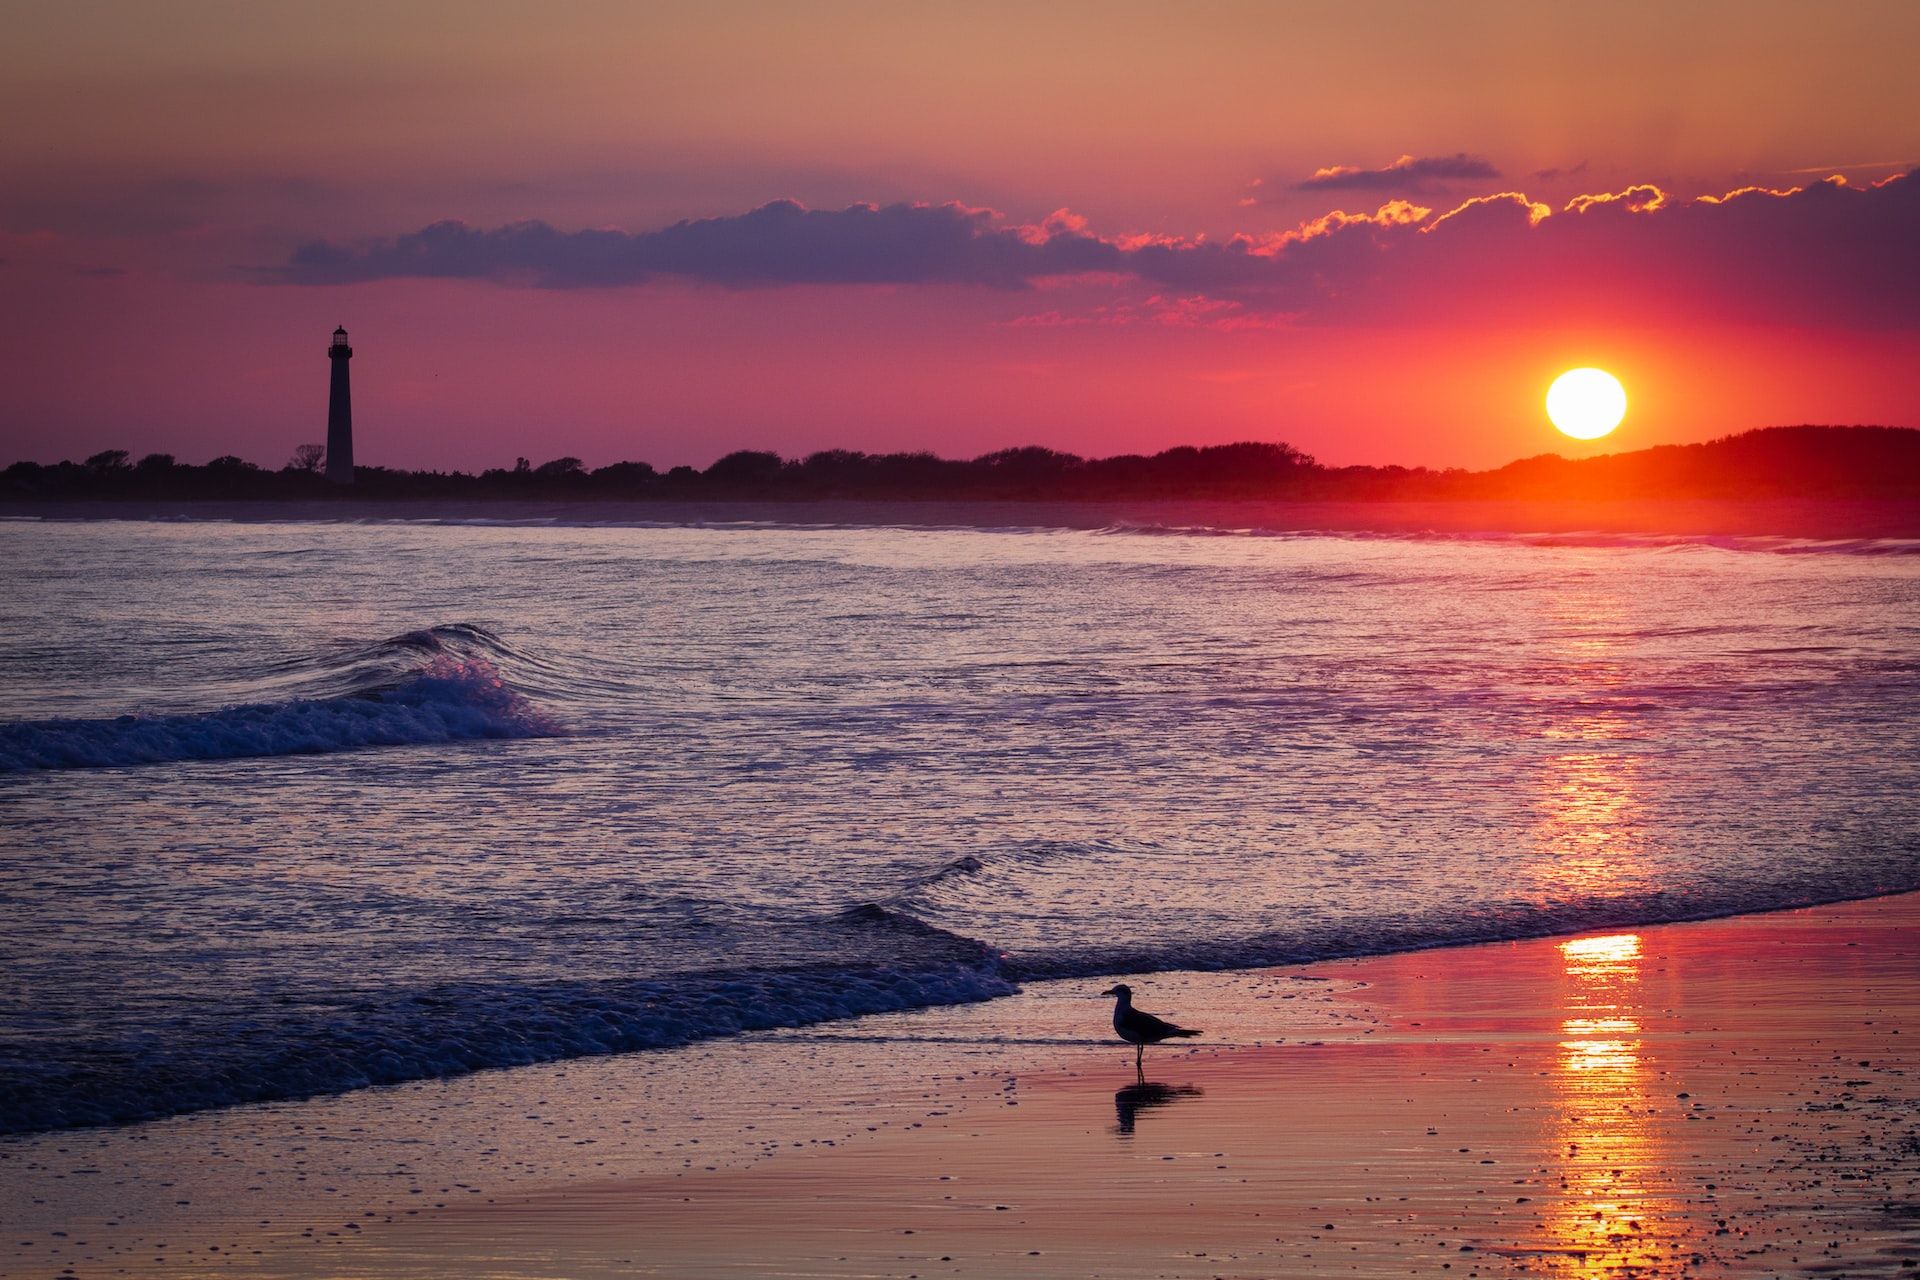 A sunset view at Sunset Beach in Cape May, New Jersey